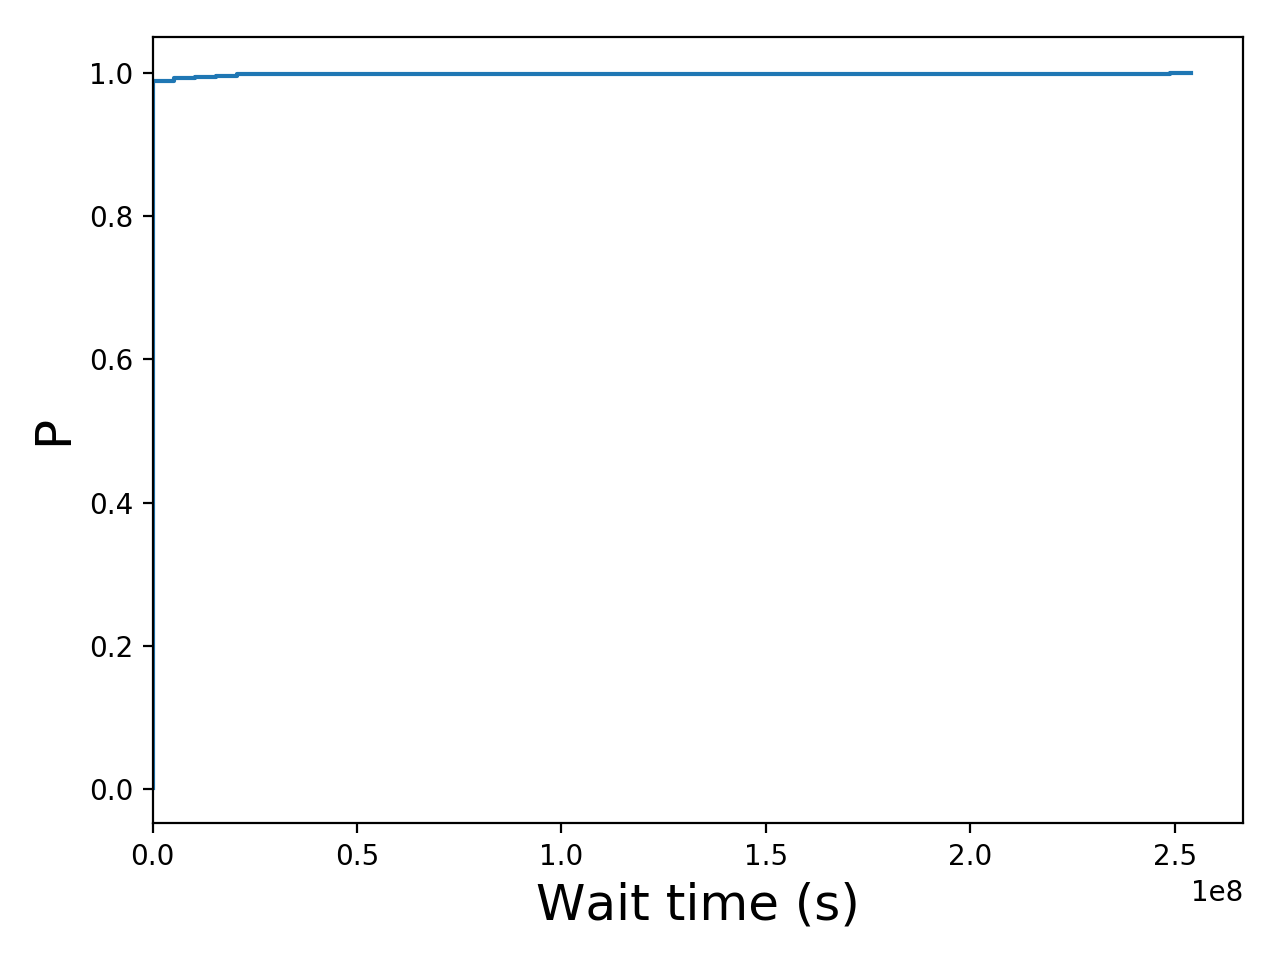 Task wait time CDF graph for the Google trace.